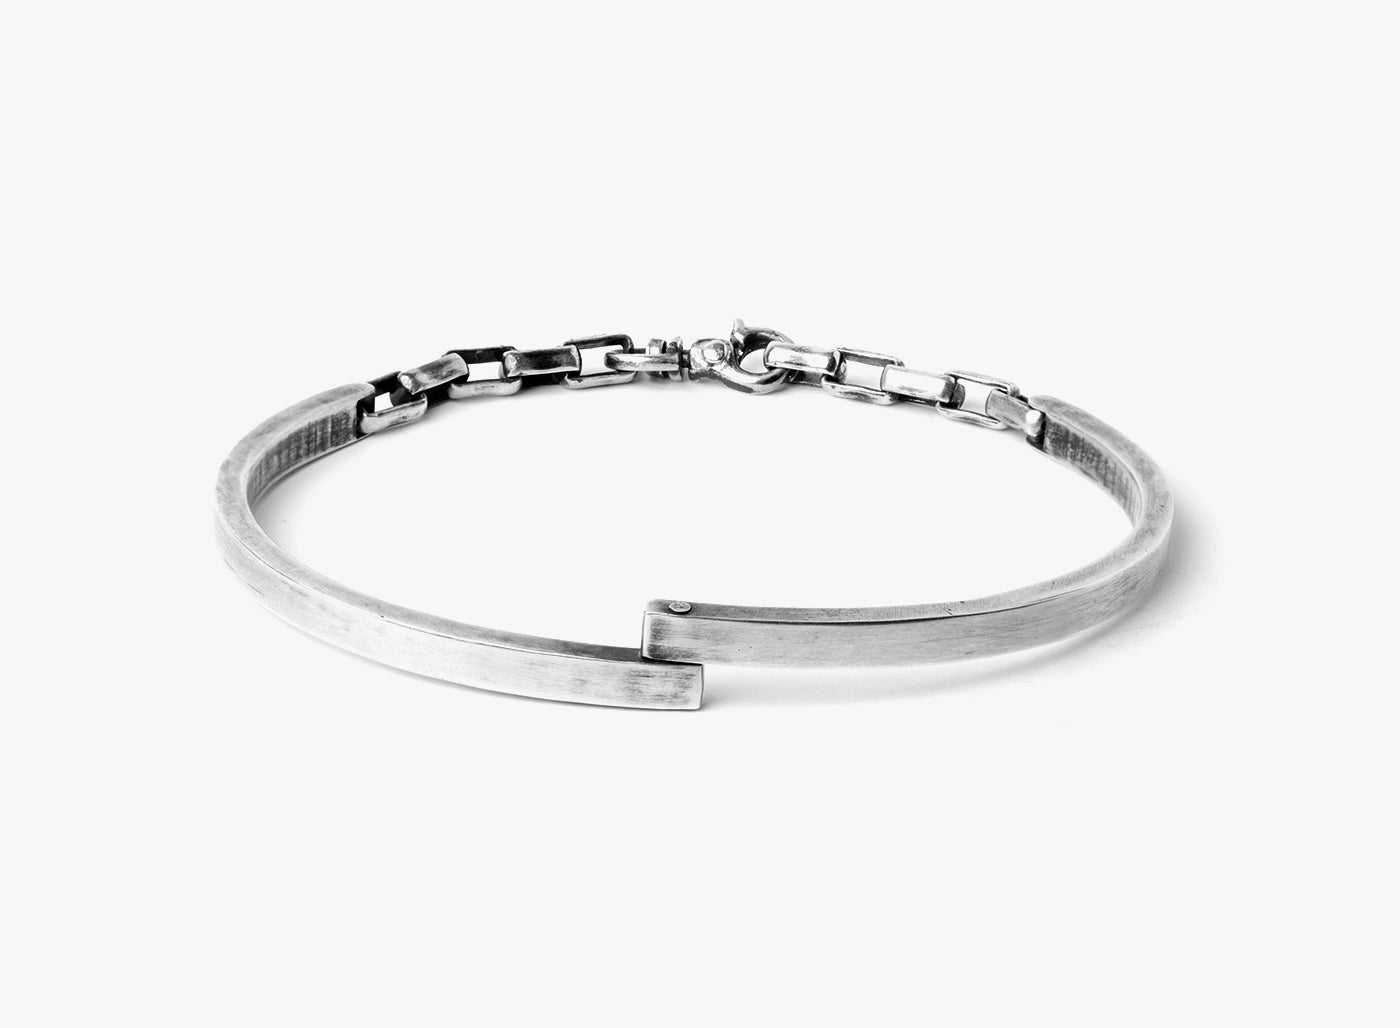 MIXED CHAIN BRACELET 151: two hinged half cuffs are connected to cable links and fastened by a carabiner lobster clasp